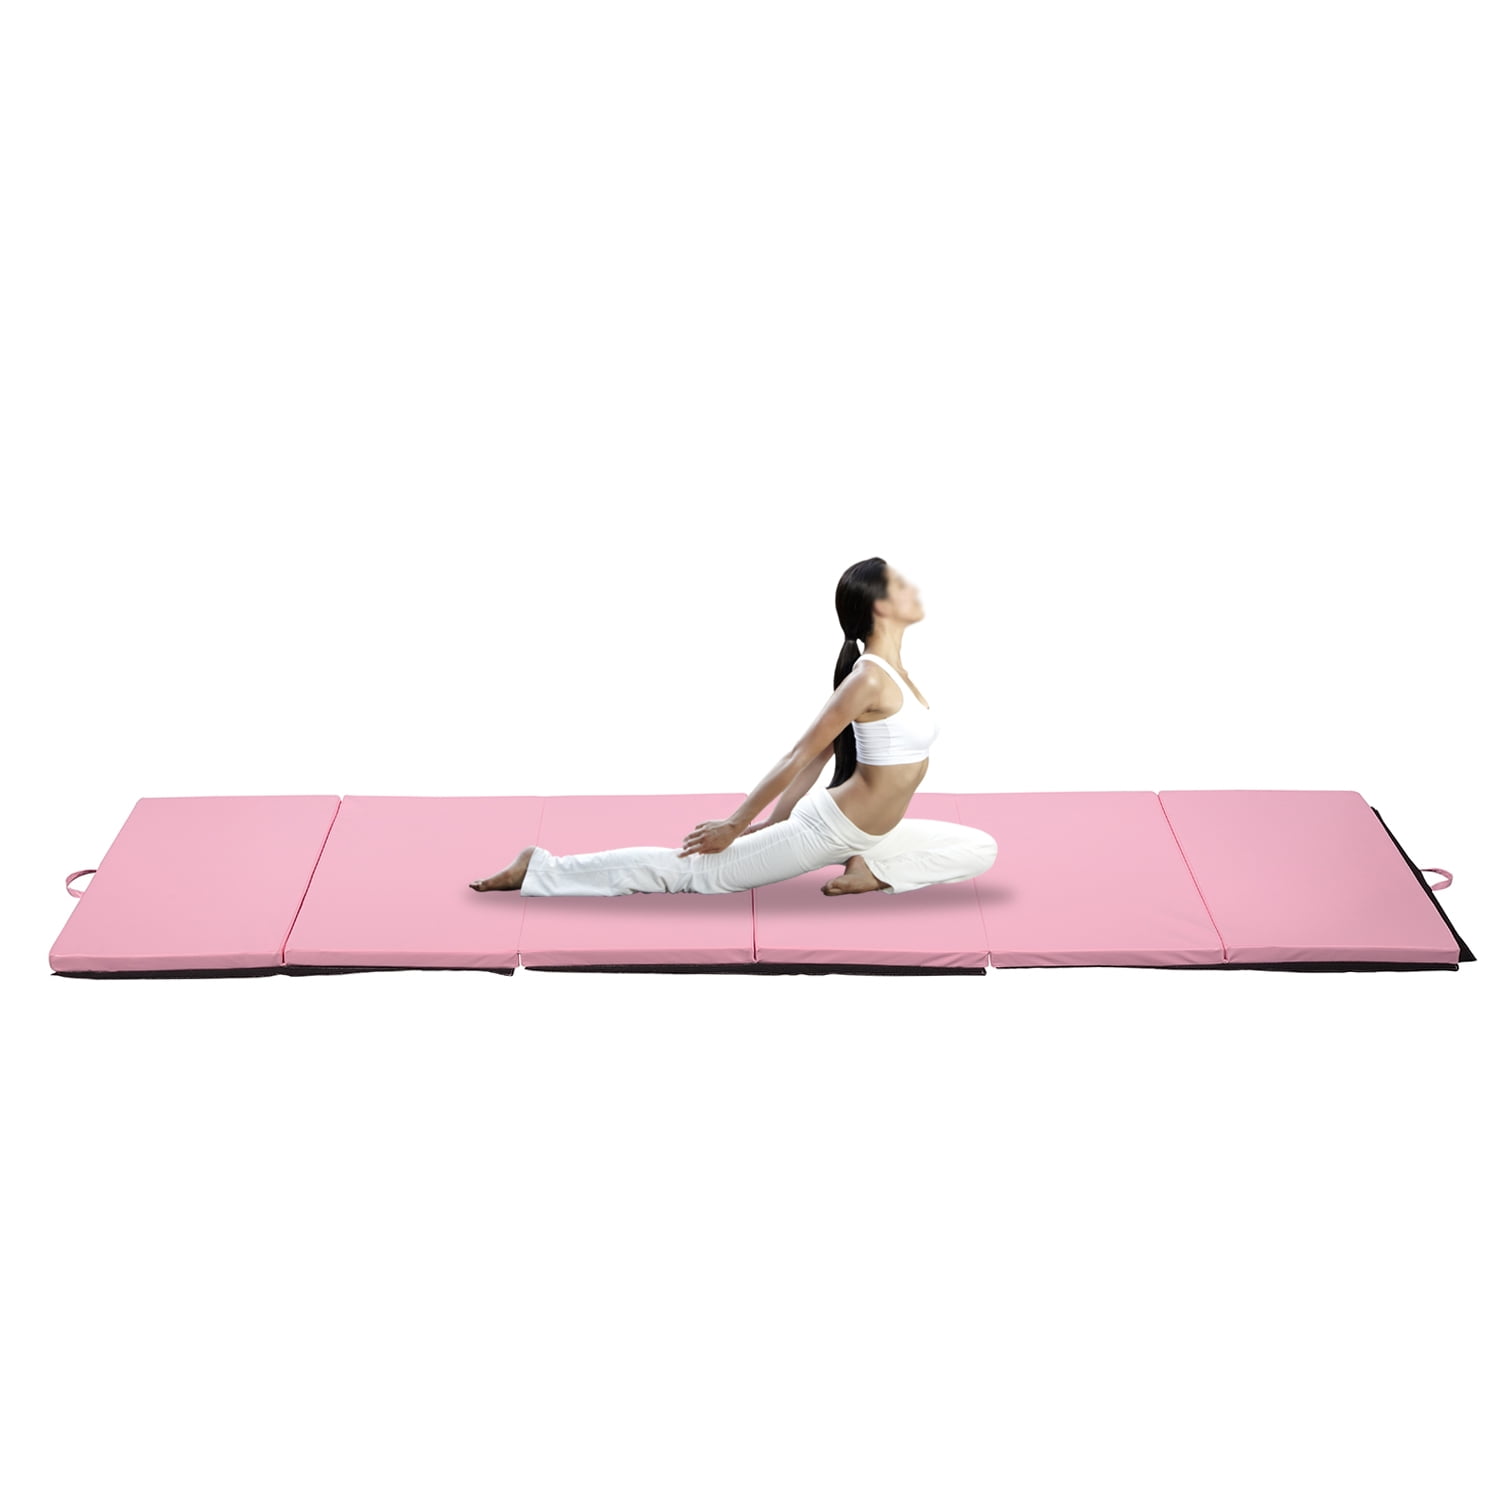 4' x 12'x 2" Solid color Gymnastics Mat Fitness Home Exercise Pad Children Gift